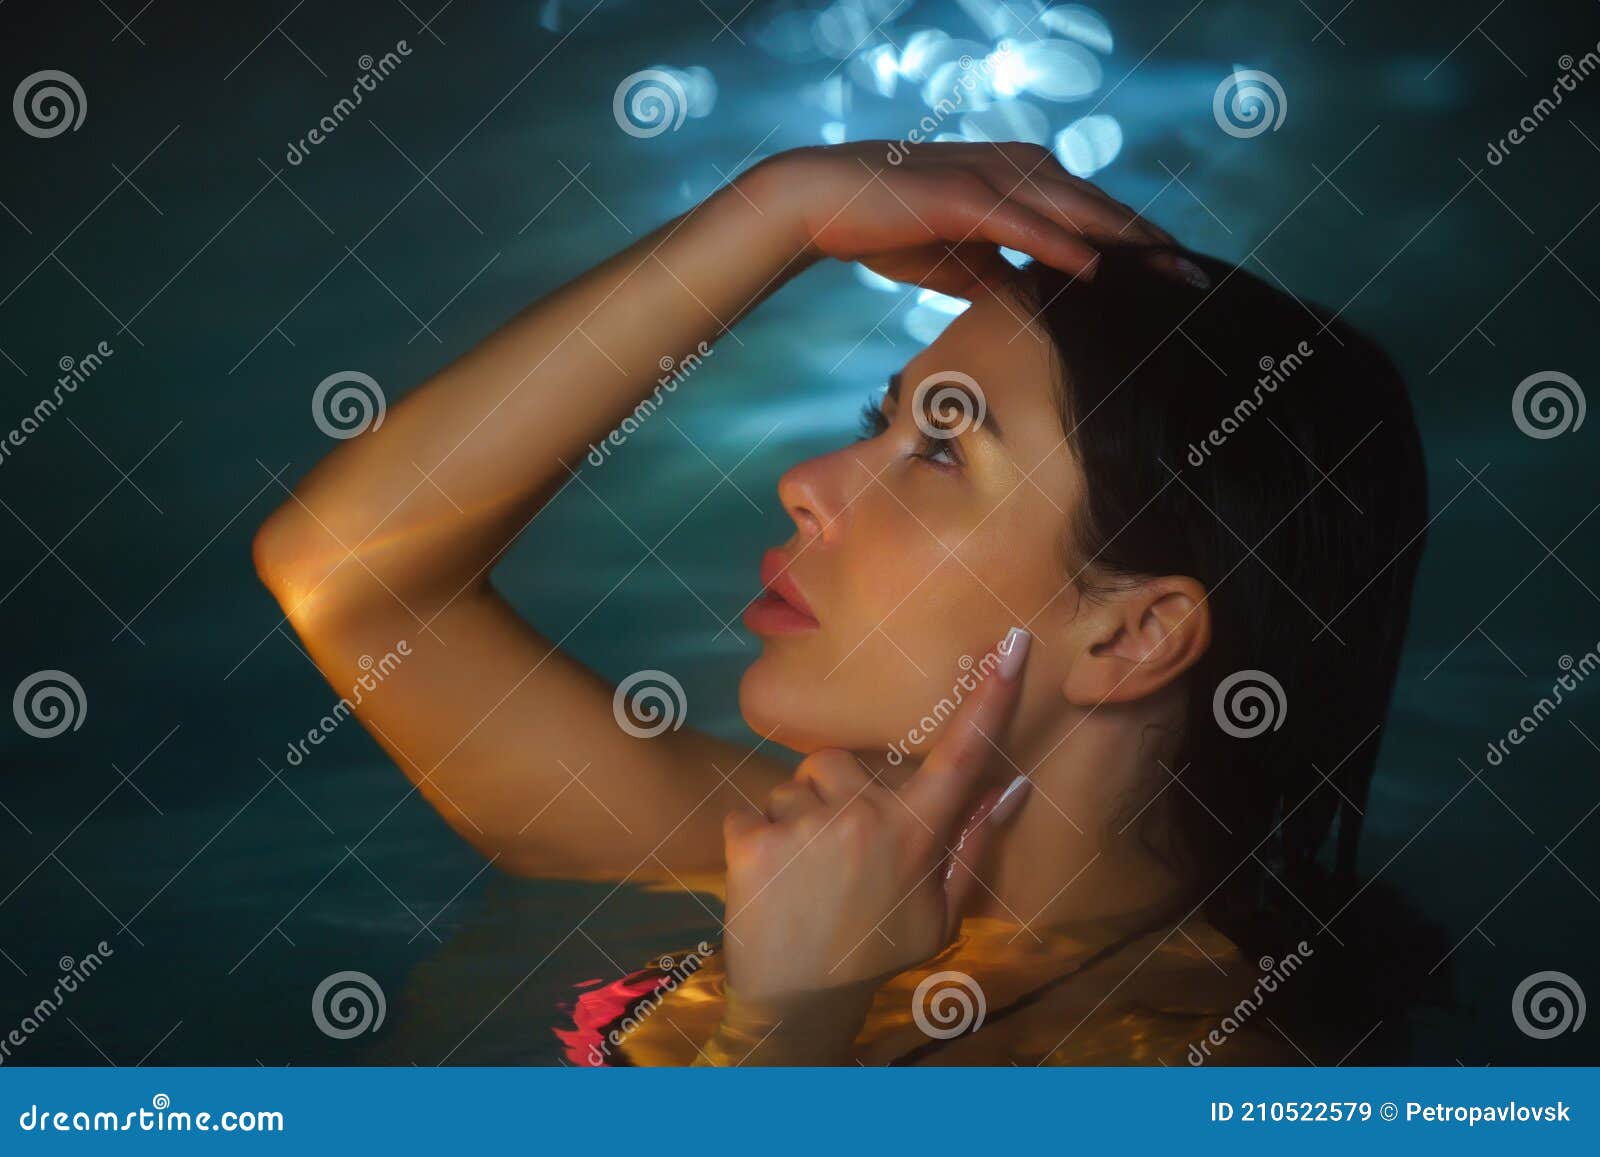 portrait woman bathing in pool with geothermal water balneotherapy spa, hot springs resorts at night